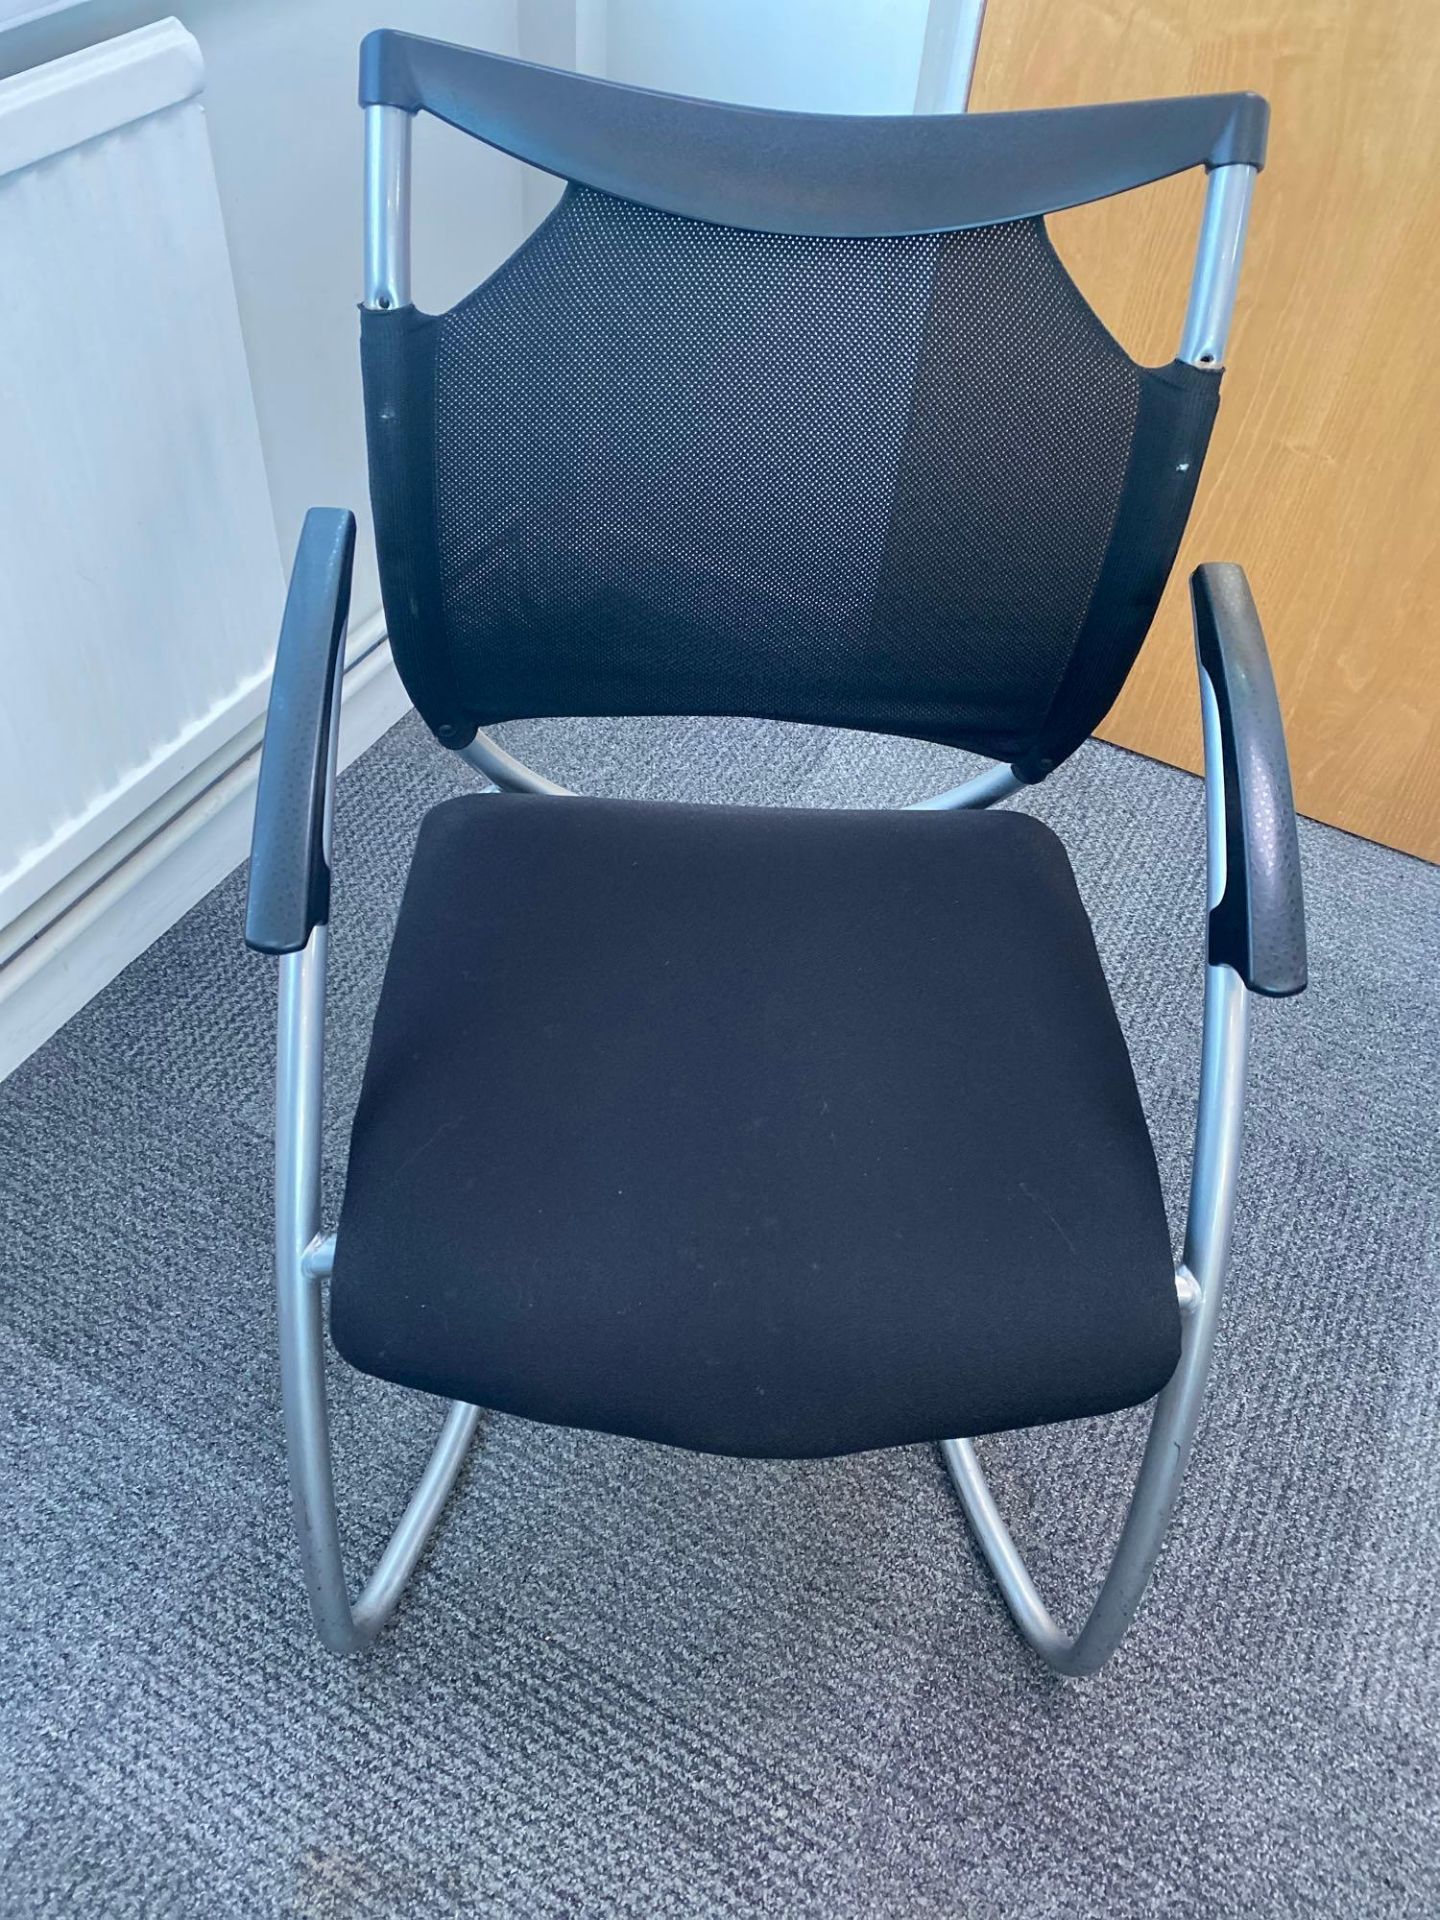 10 LGA GS, chrome frame black mesh back cantilever meeting room chairs - Image 4 of 4